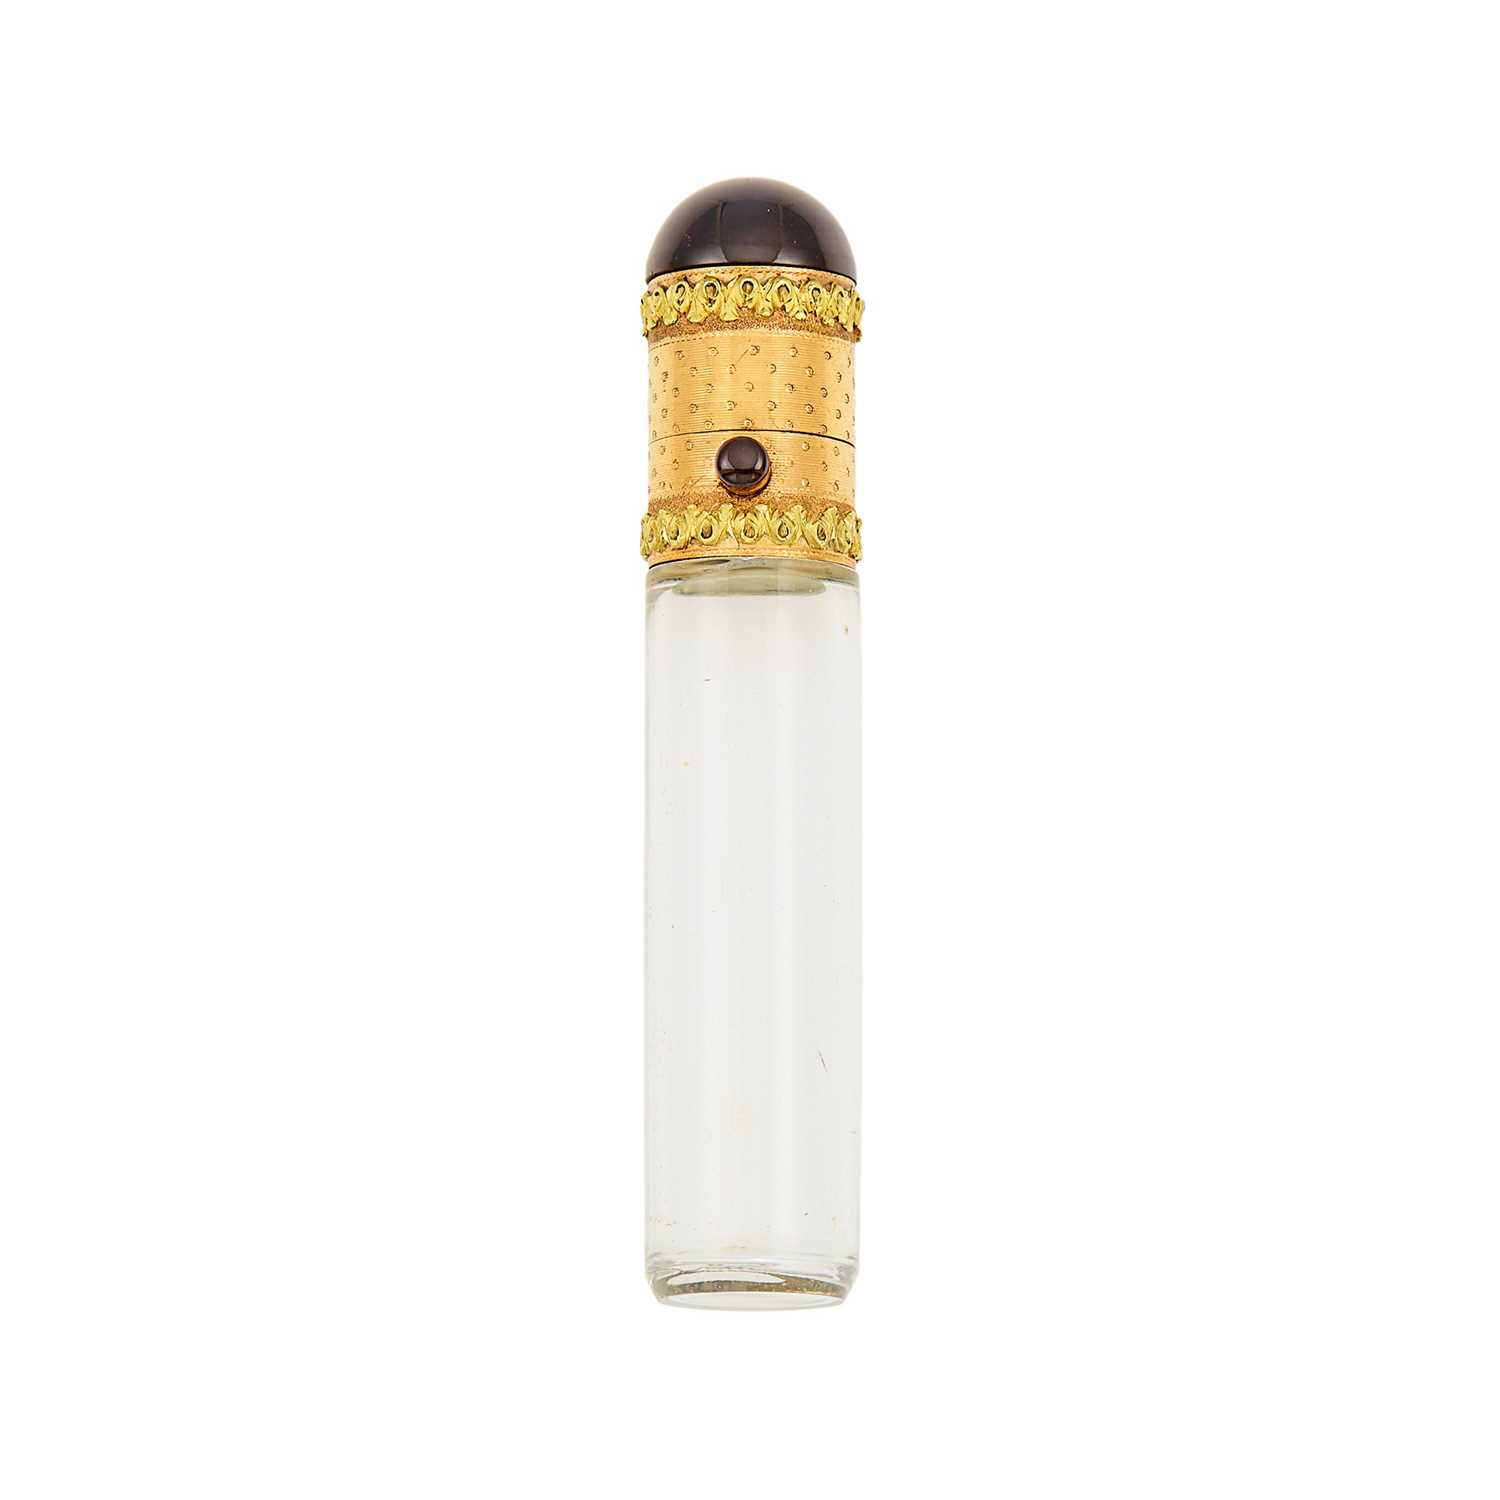 Lot 1112 - Rock Crystal, Two-Color Gold and Garnet Perfume Bottle